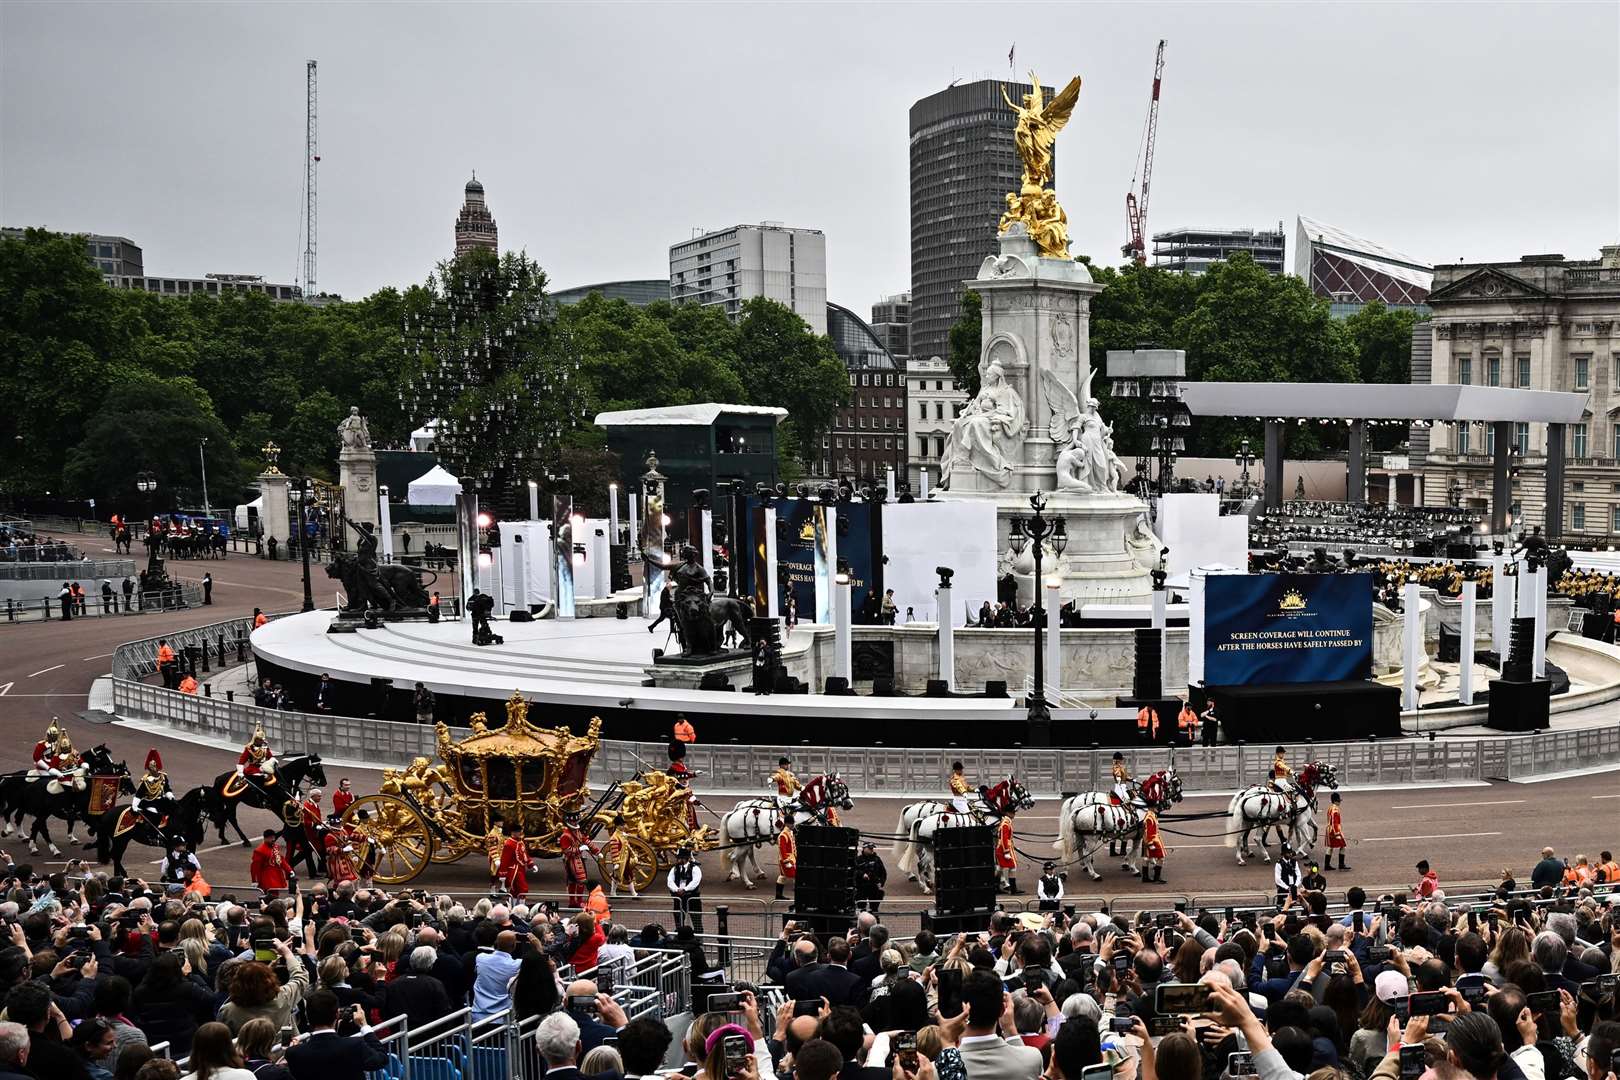 The coach making its way past Buckingham Palace during the Platinum Jubilee celebrations (Ben Stansall/PA)